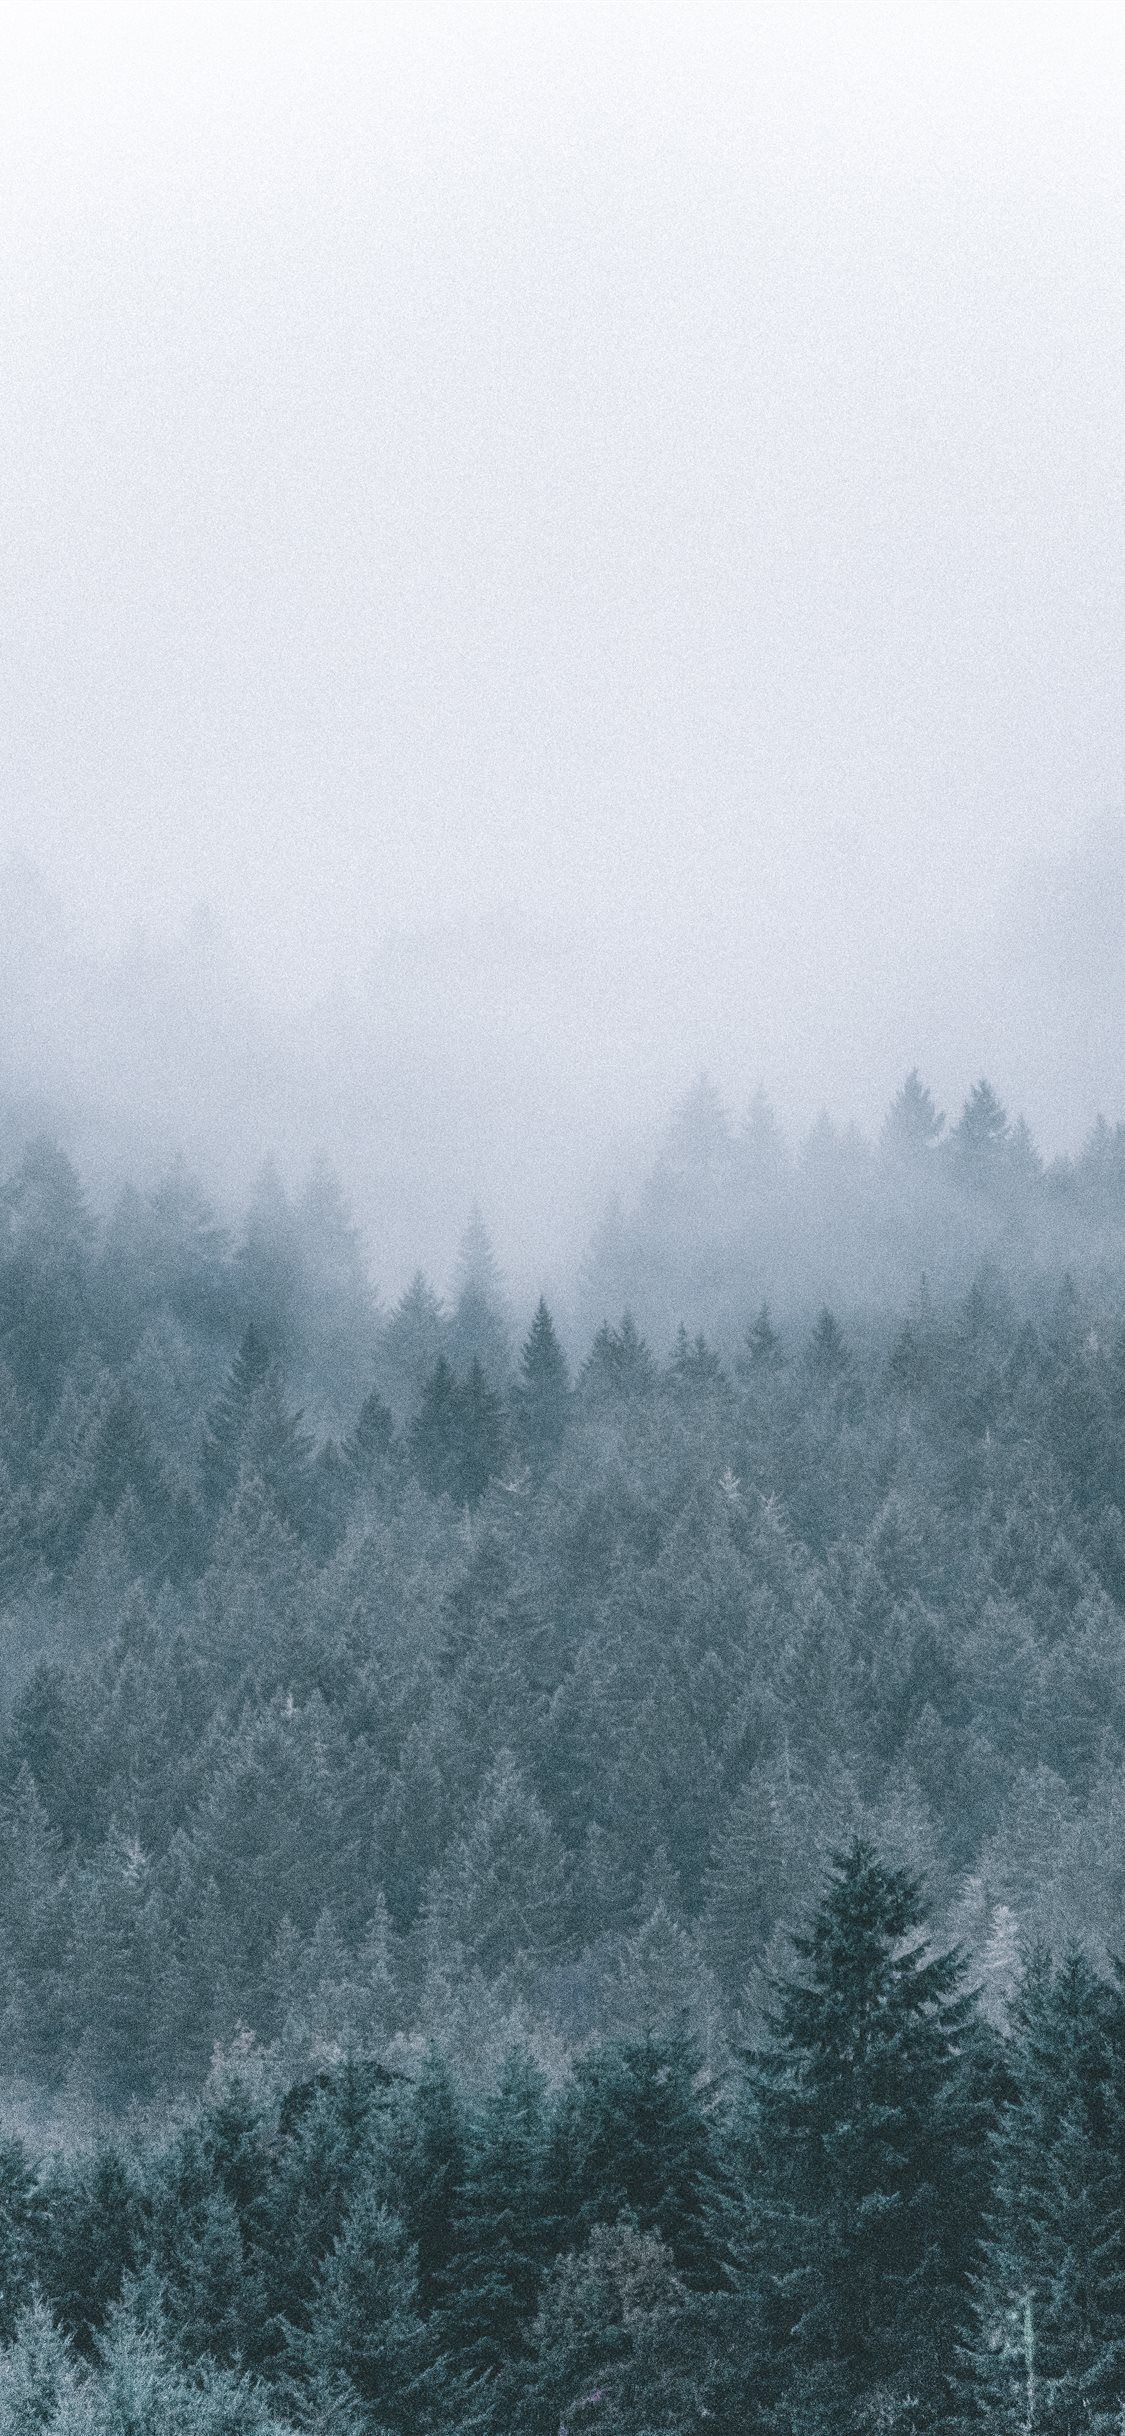 Foggy scenery, Icy green pine trees, Misty iPhone wallpapers, Pokmon Misty, 1130x2440 HD Phone